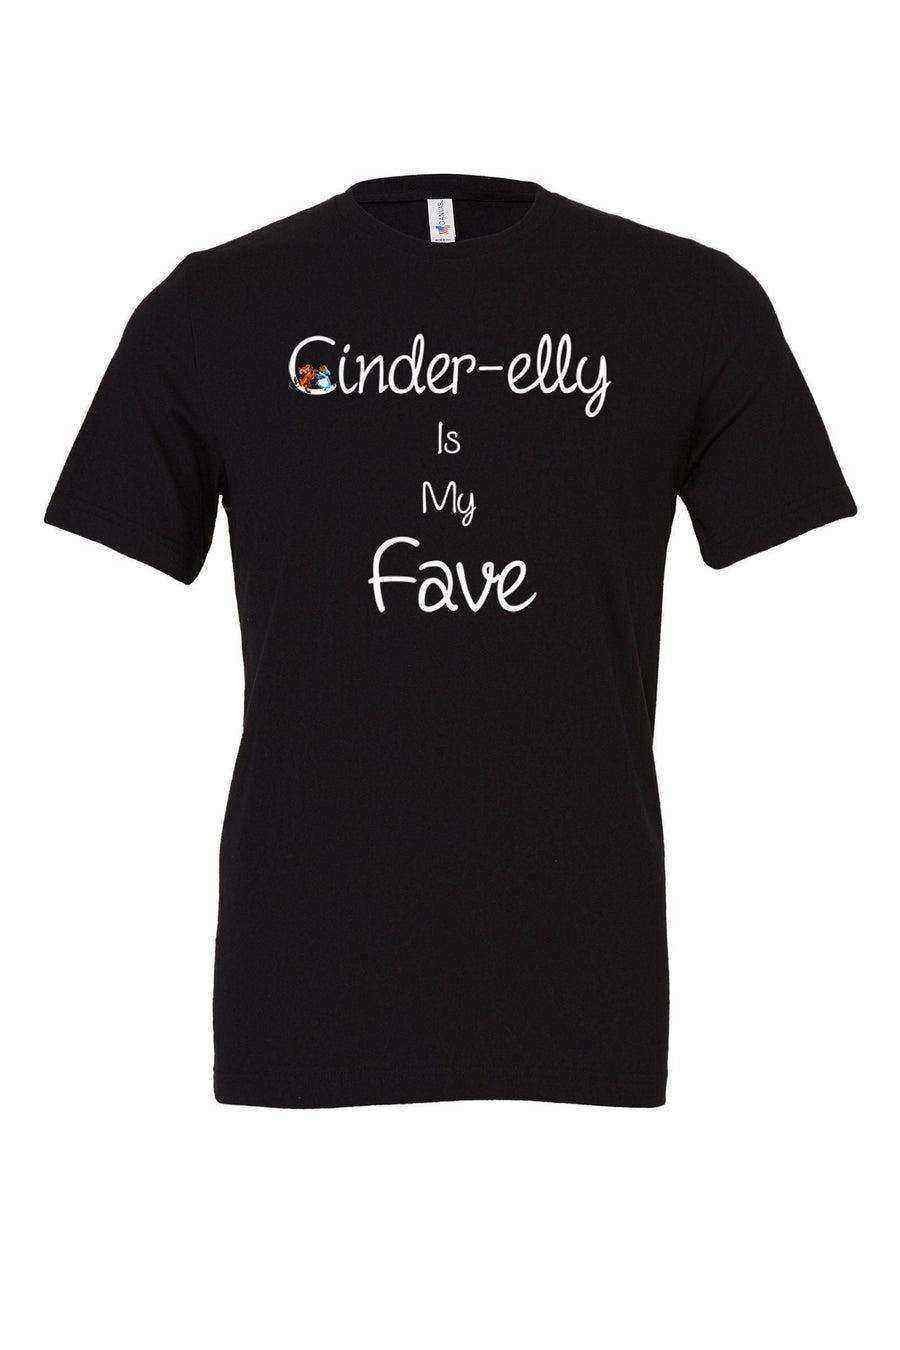 Womens | Cinder-elly is my Fave Shirt - Dylan's Tees